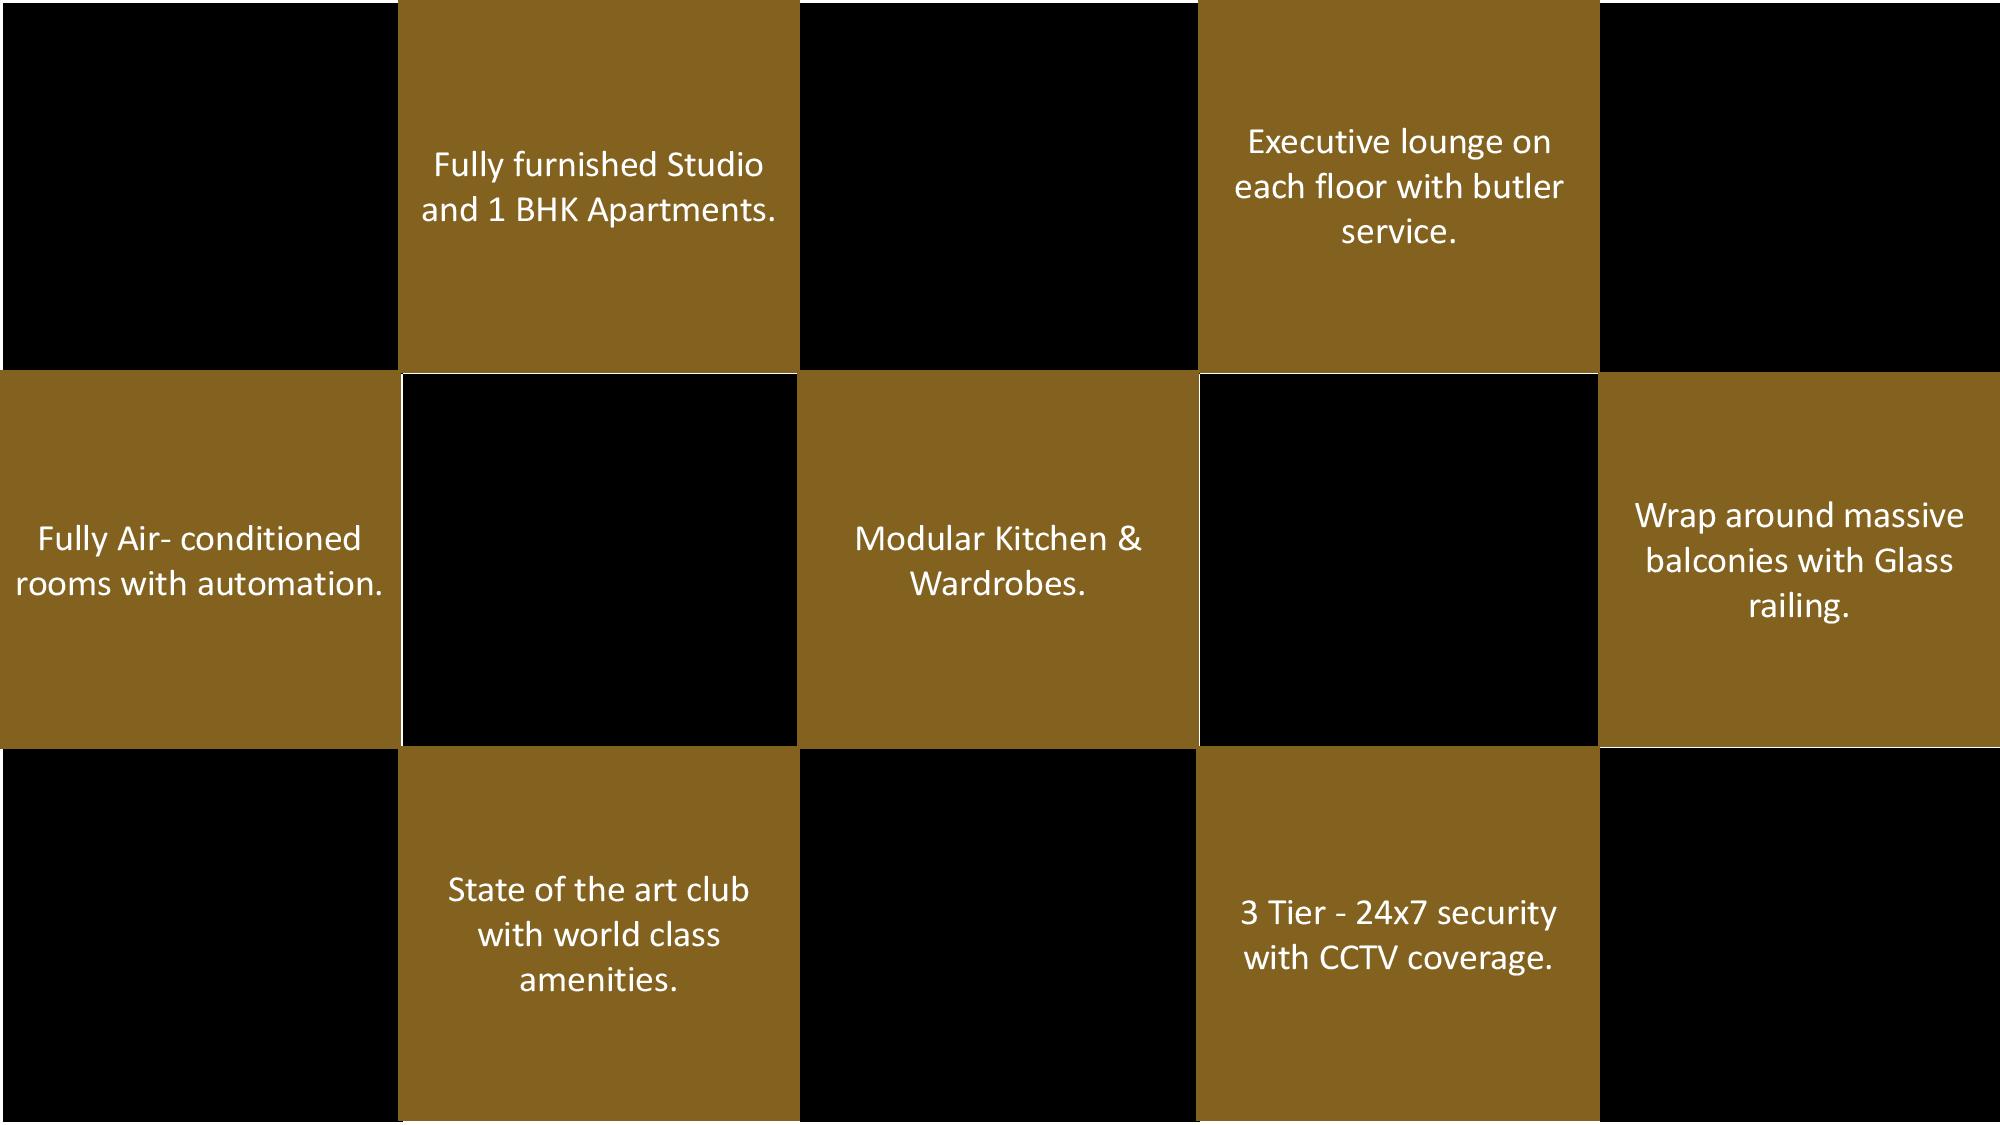 Fully furnished studio and 1 BHK apartments at Central Park Belvista, Gurgaon Update